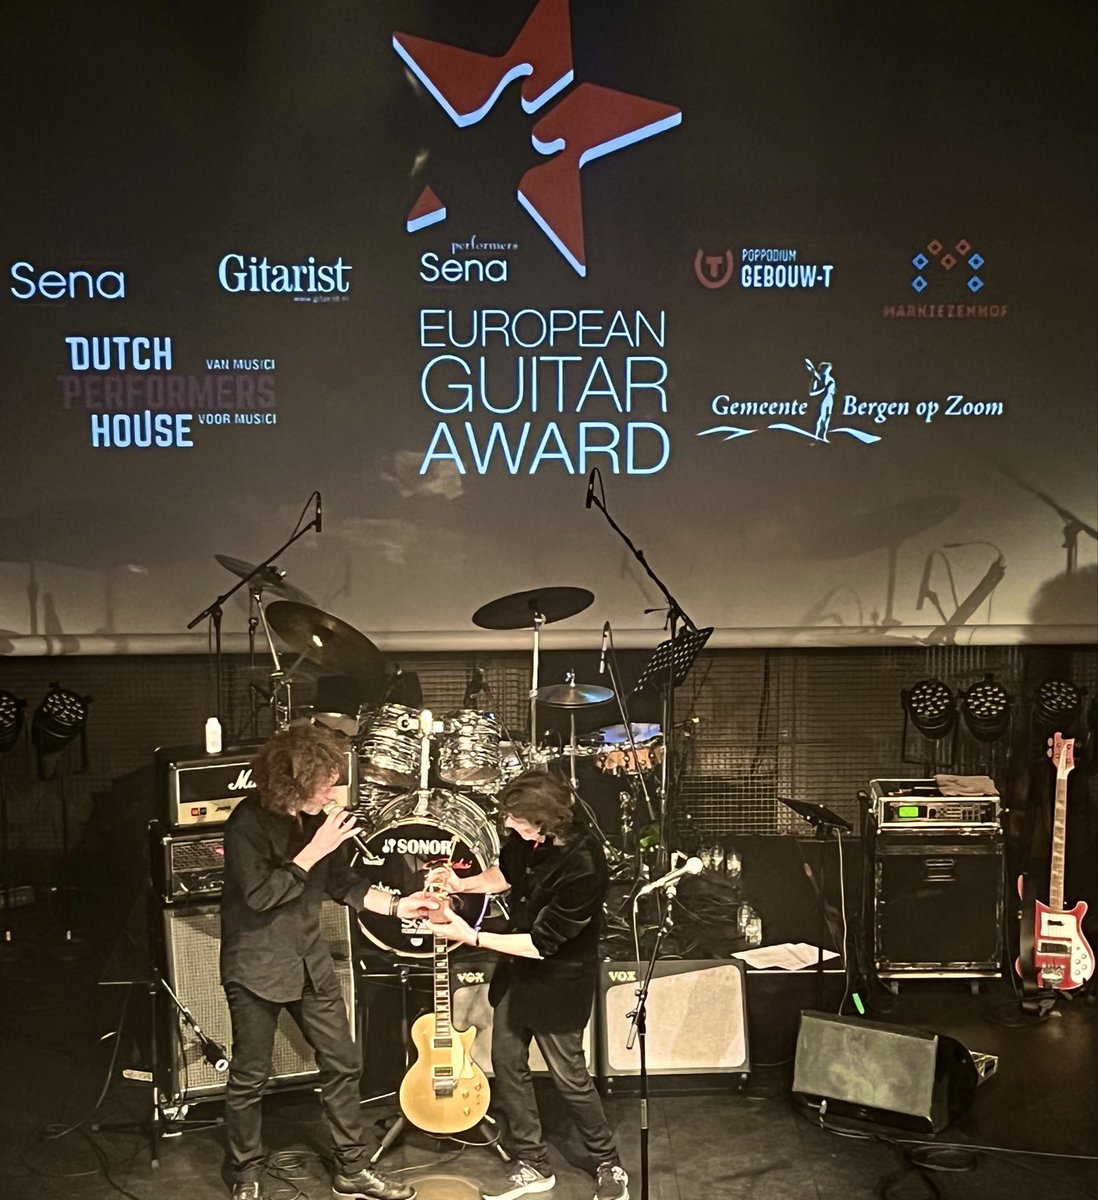 It was such an honour to receive the Sena Performers European Guitar Award last night in Bergen op Zoom. Terrific to see everyone there including great musicians such as previous award winner Jan Akkerman.